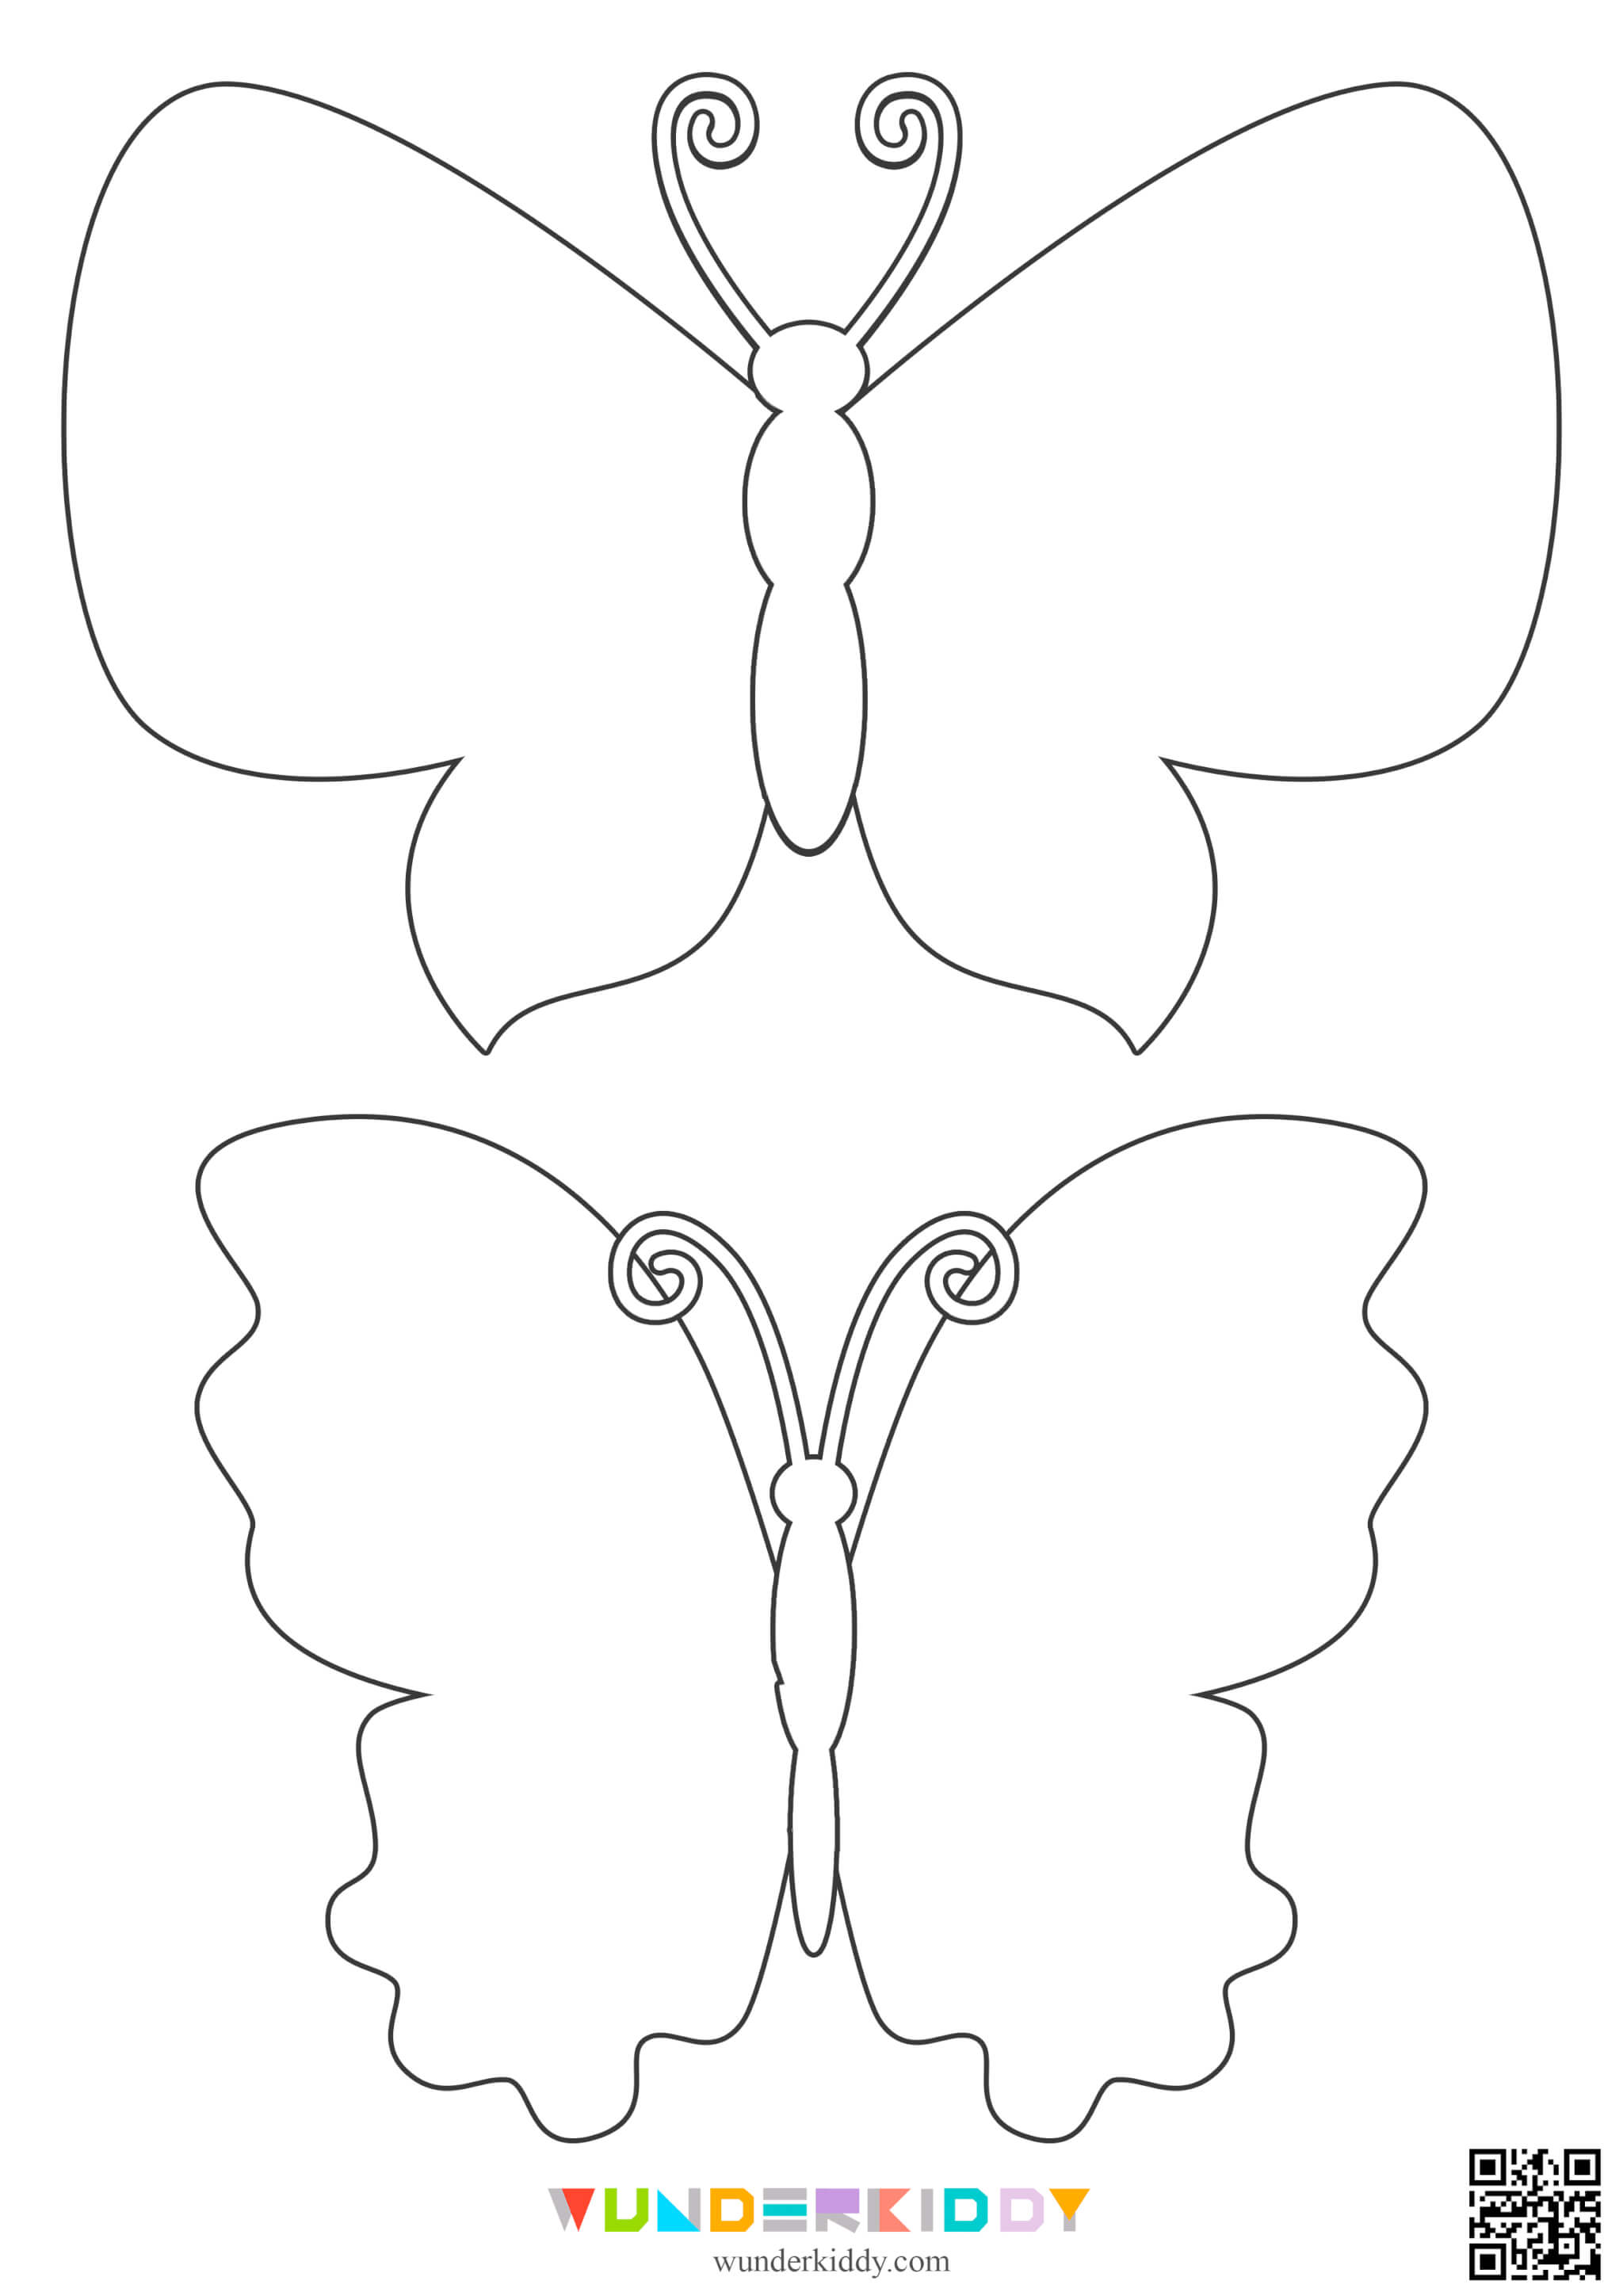 Free Printable Butterfly Templates - Image 5